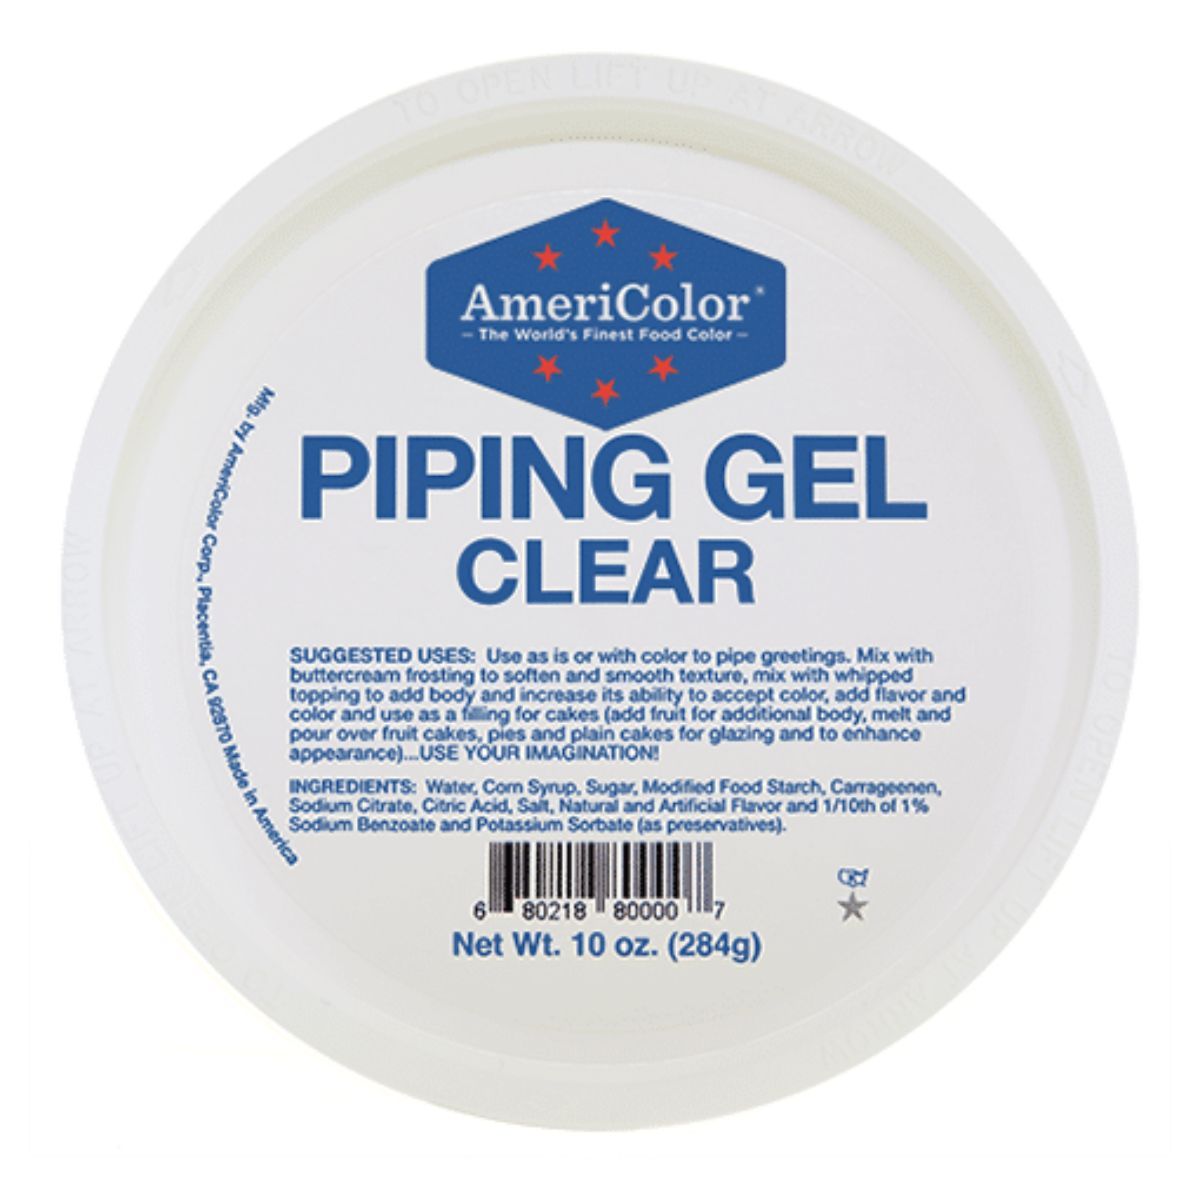 AmeriColor Piping Gel Clear